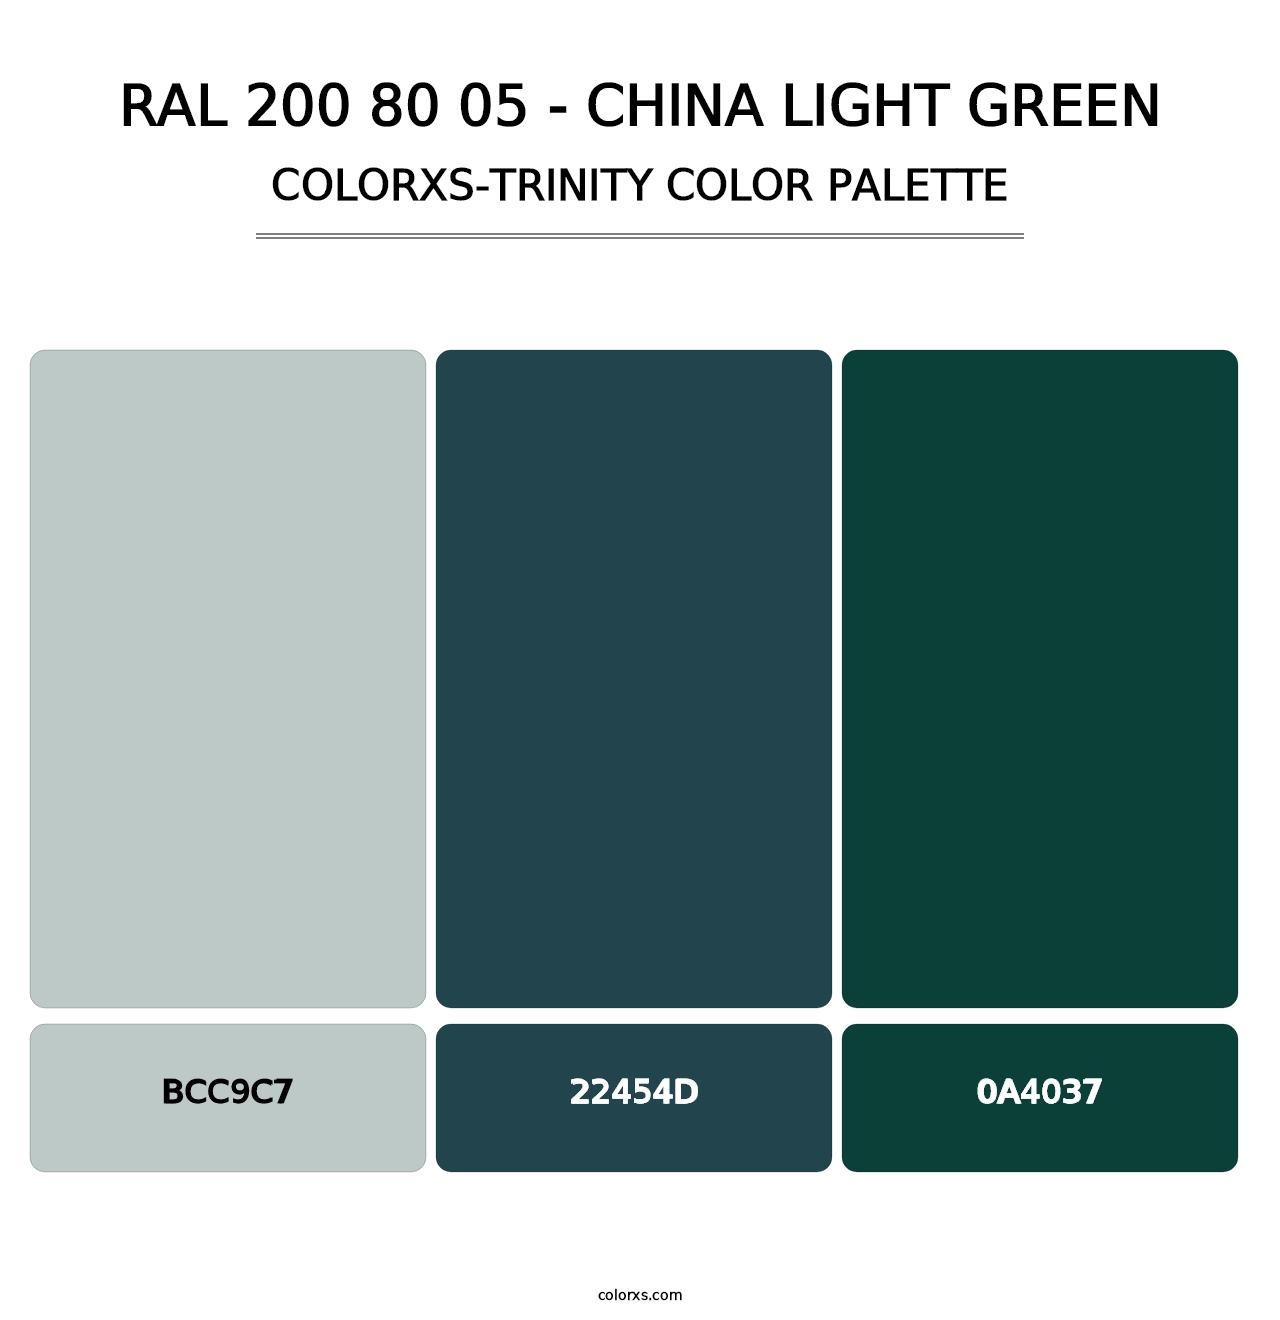 RAL 200 80 05 - China Light Green - Colorxs Trinity Palette